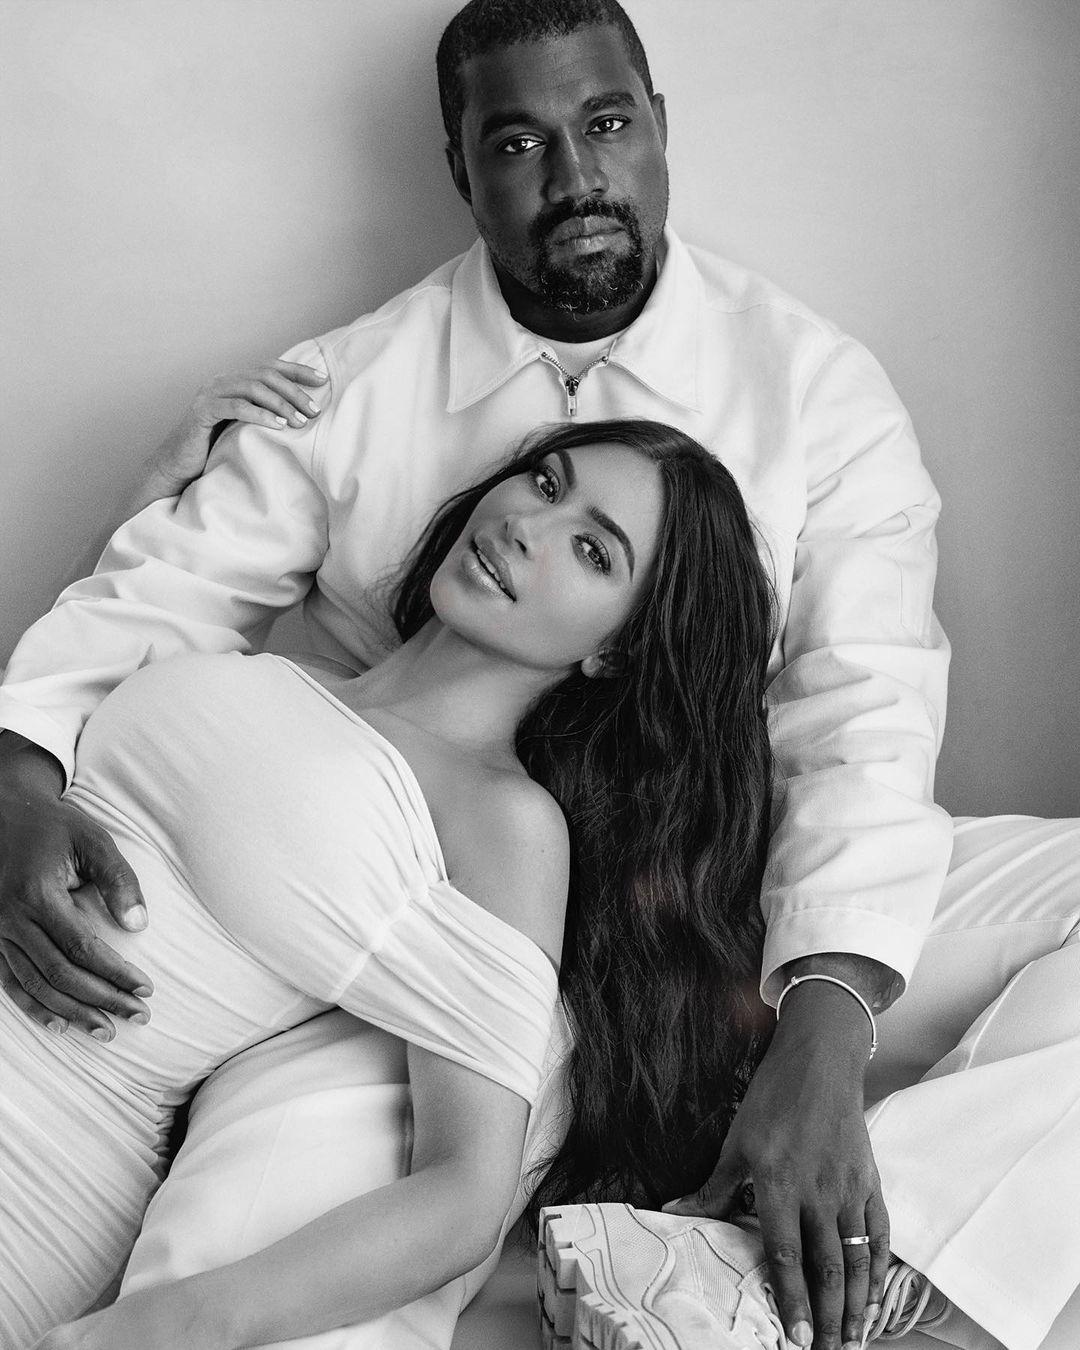 A black and white themed photo showing Kanye West and Kim Kardashian in white outfits.